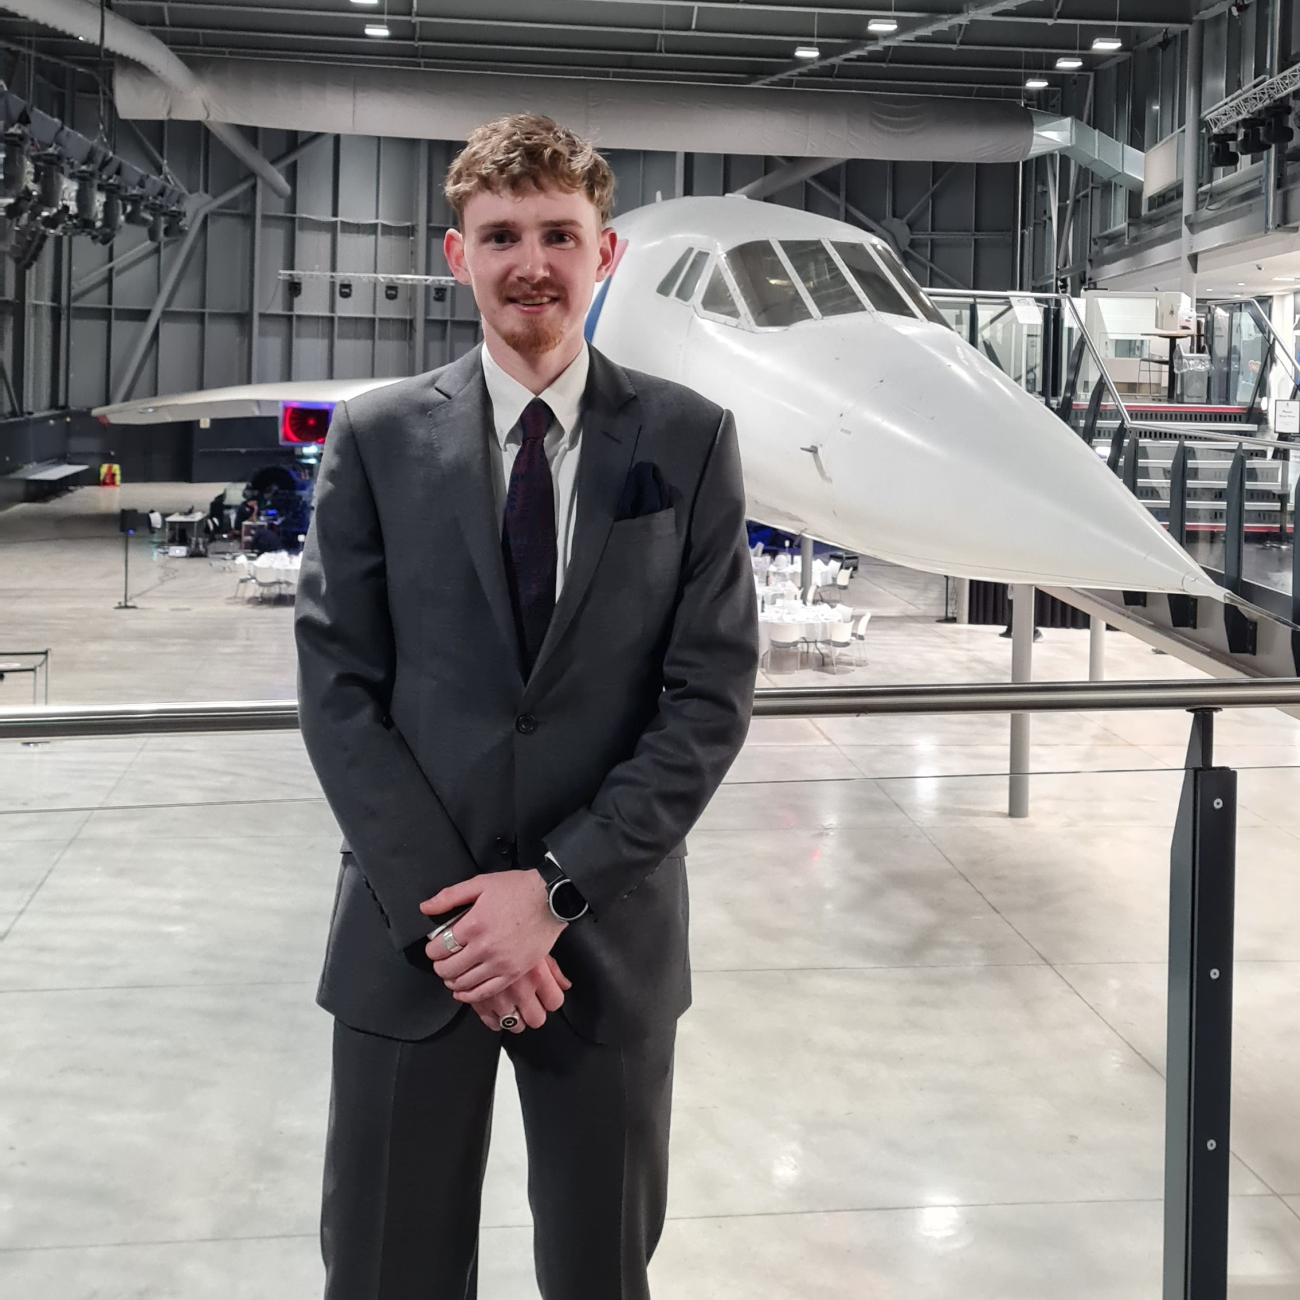 Bede standing in front of airplane at Airbus